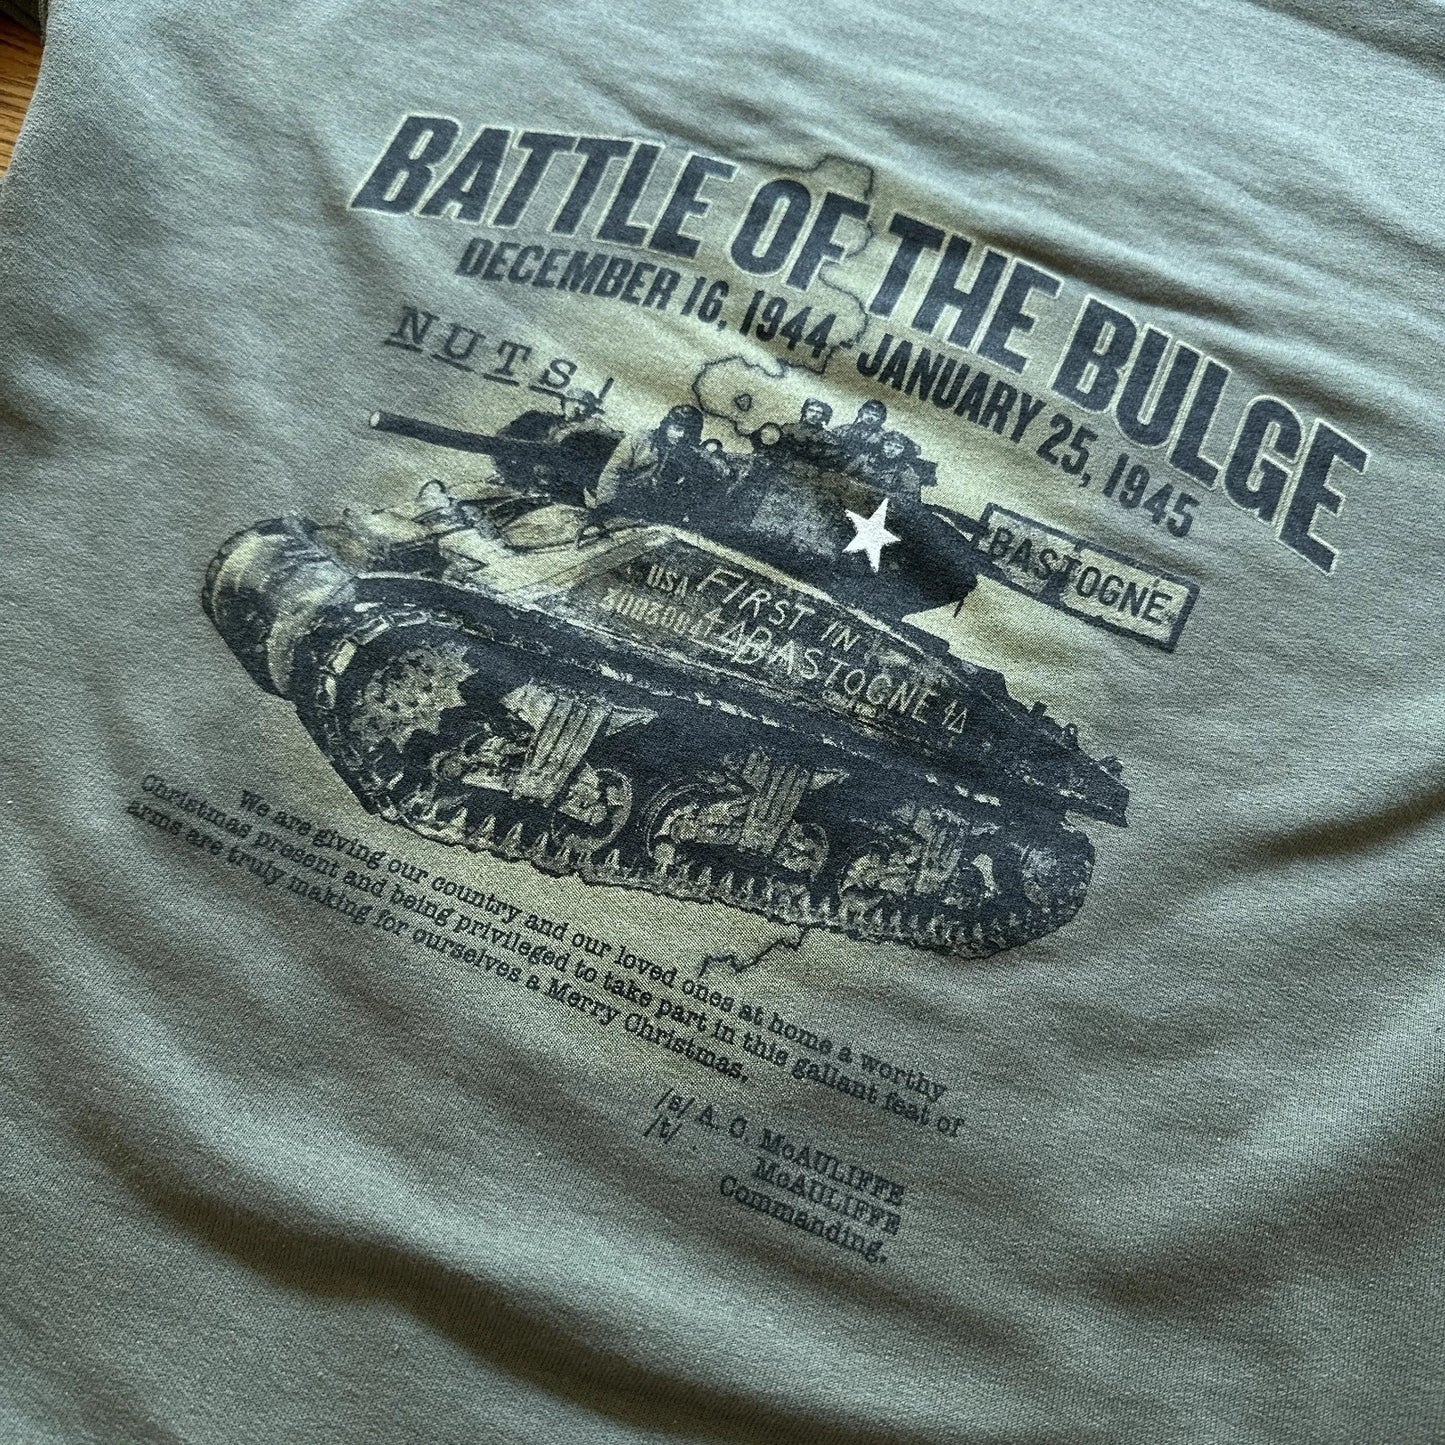 Close-up of back of The Battle of the Bulge Hooded sweatshirt from The History List store